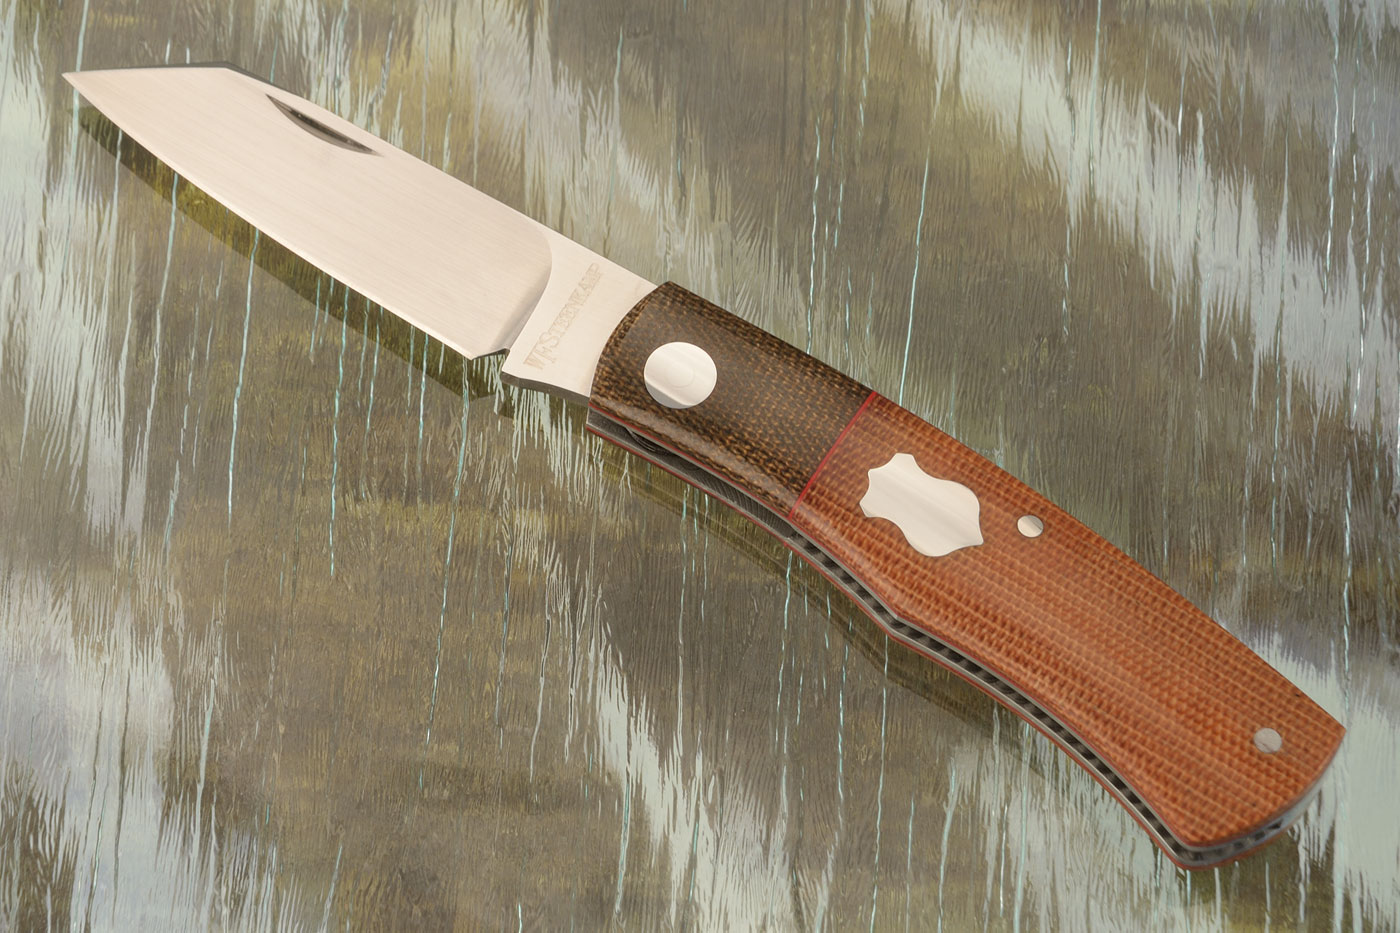 Native Slipjoint with Natural and Green Micarta - M390